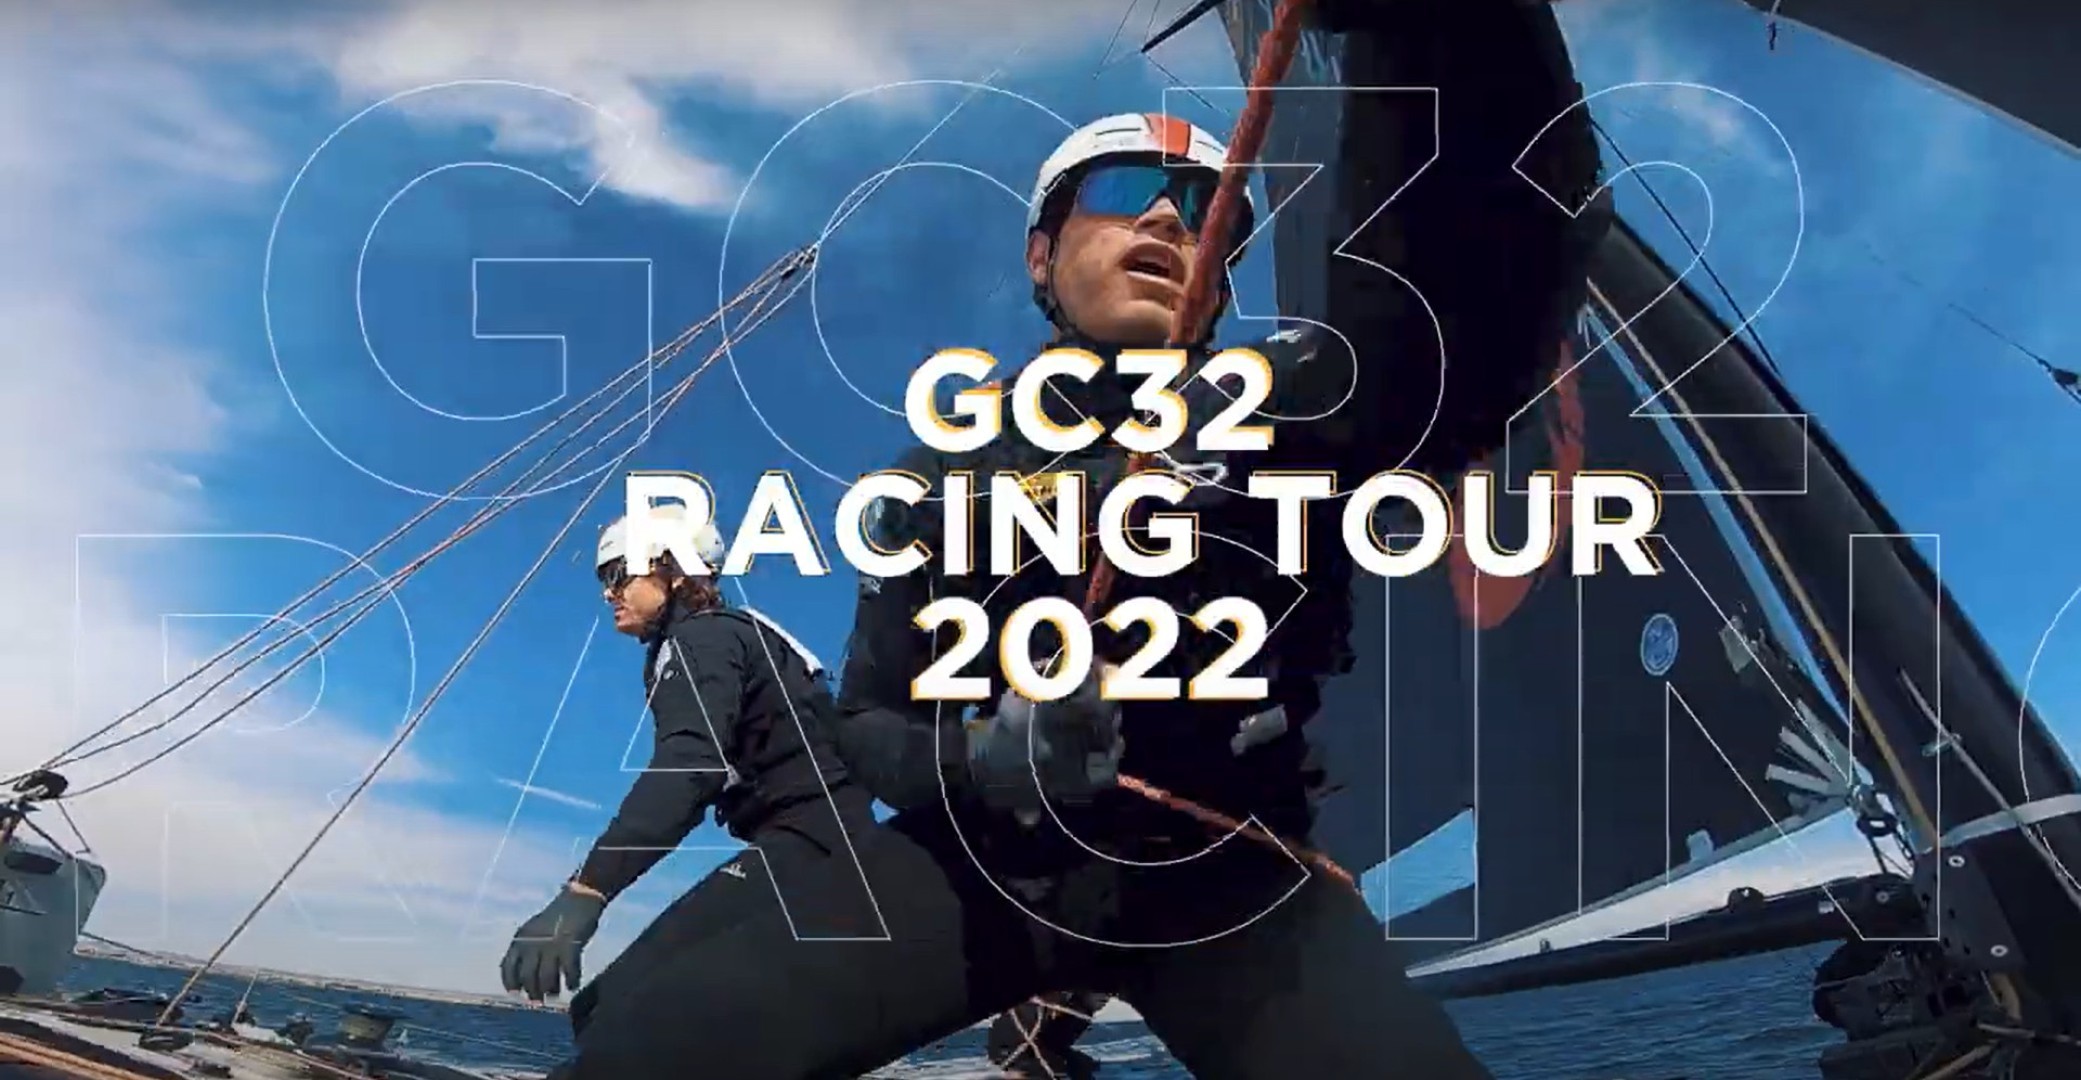 GC32 Racing Tour 2022 promo by Icarus Sports